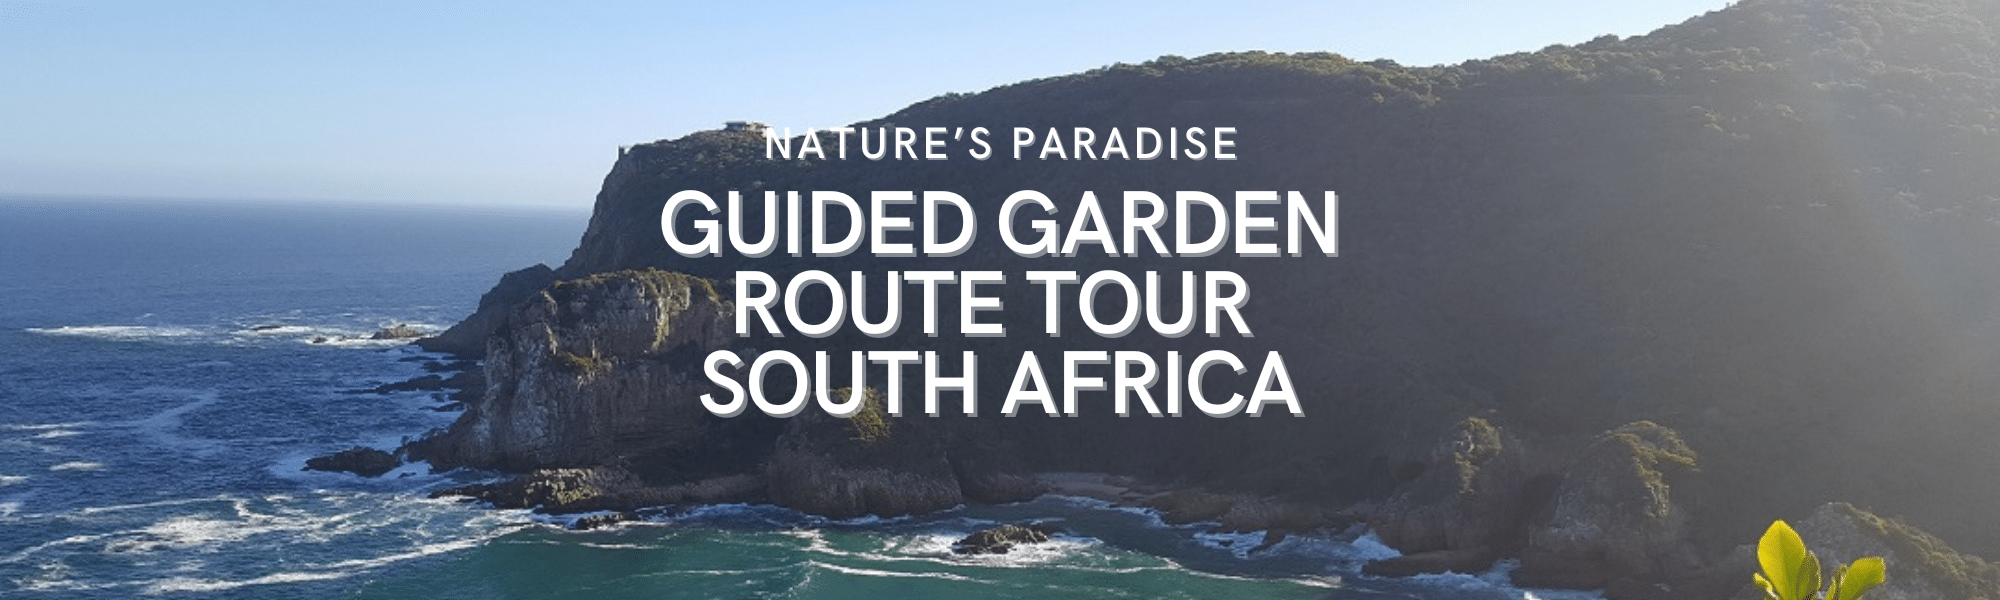 Guided Garden Route Tour South Africa